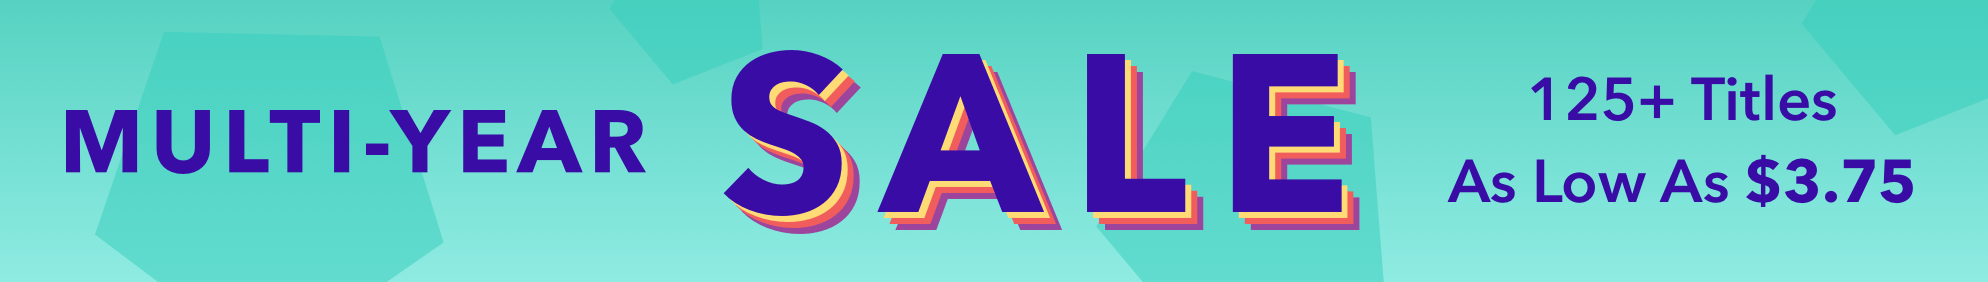 The Multi-Year Sale July 20